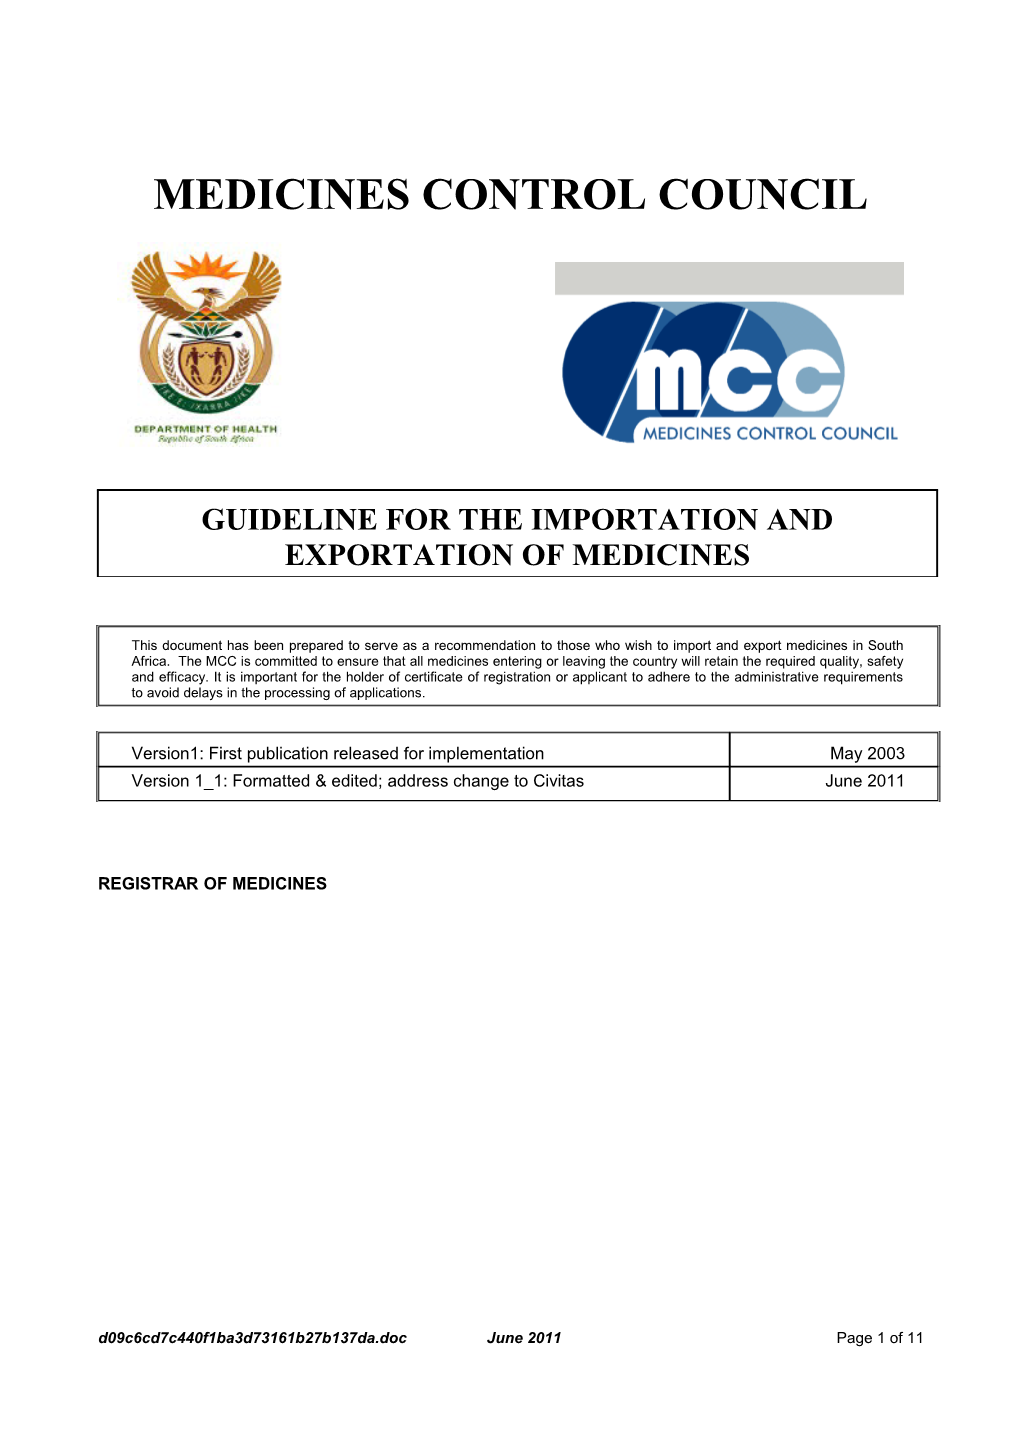 Guideline for the Importation and Exportation of Medicines